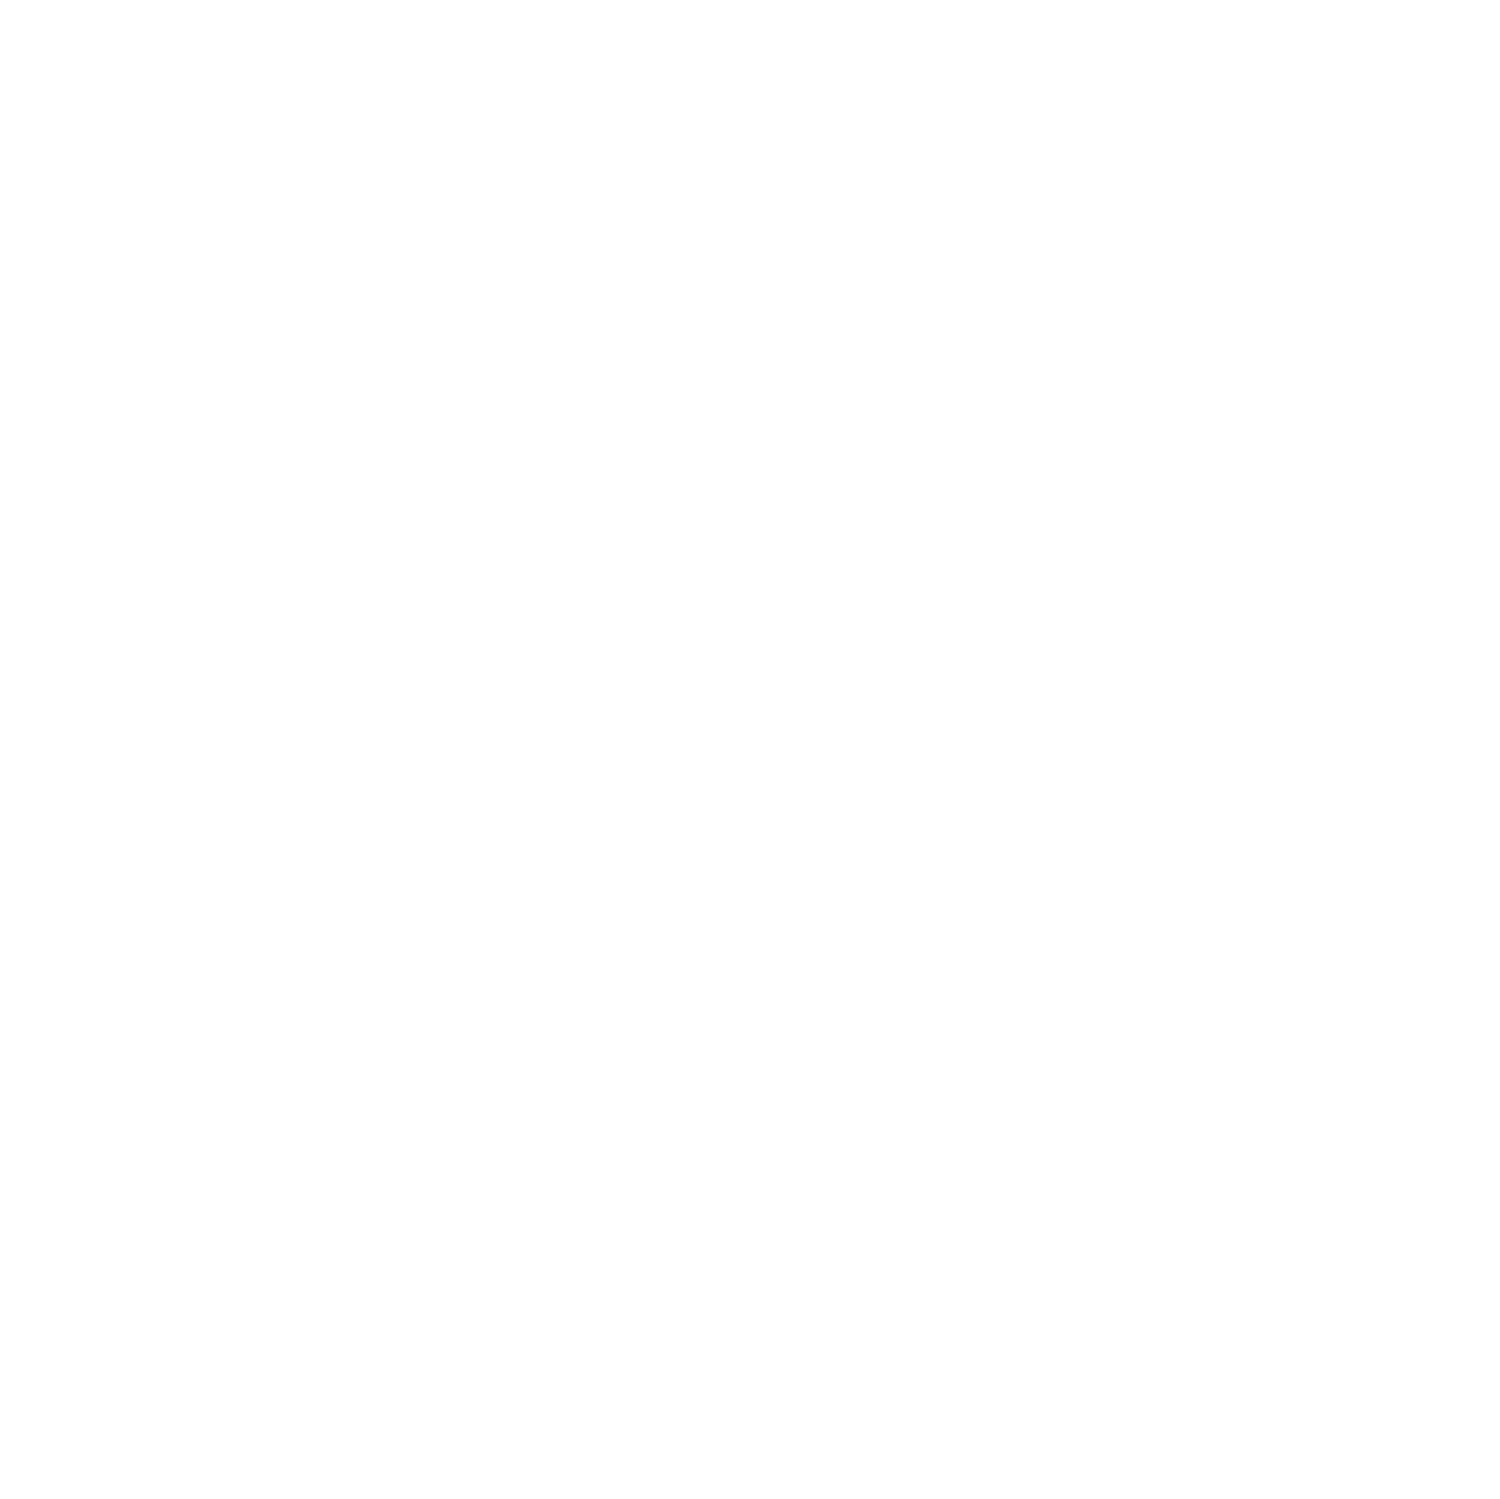 www.ammhomeinspections.com